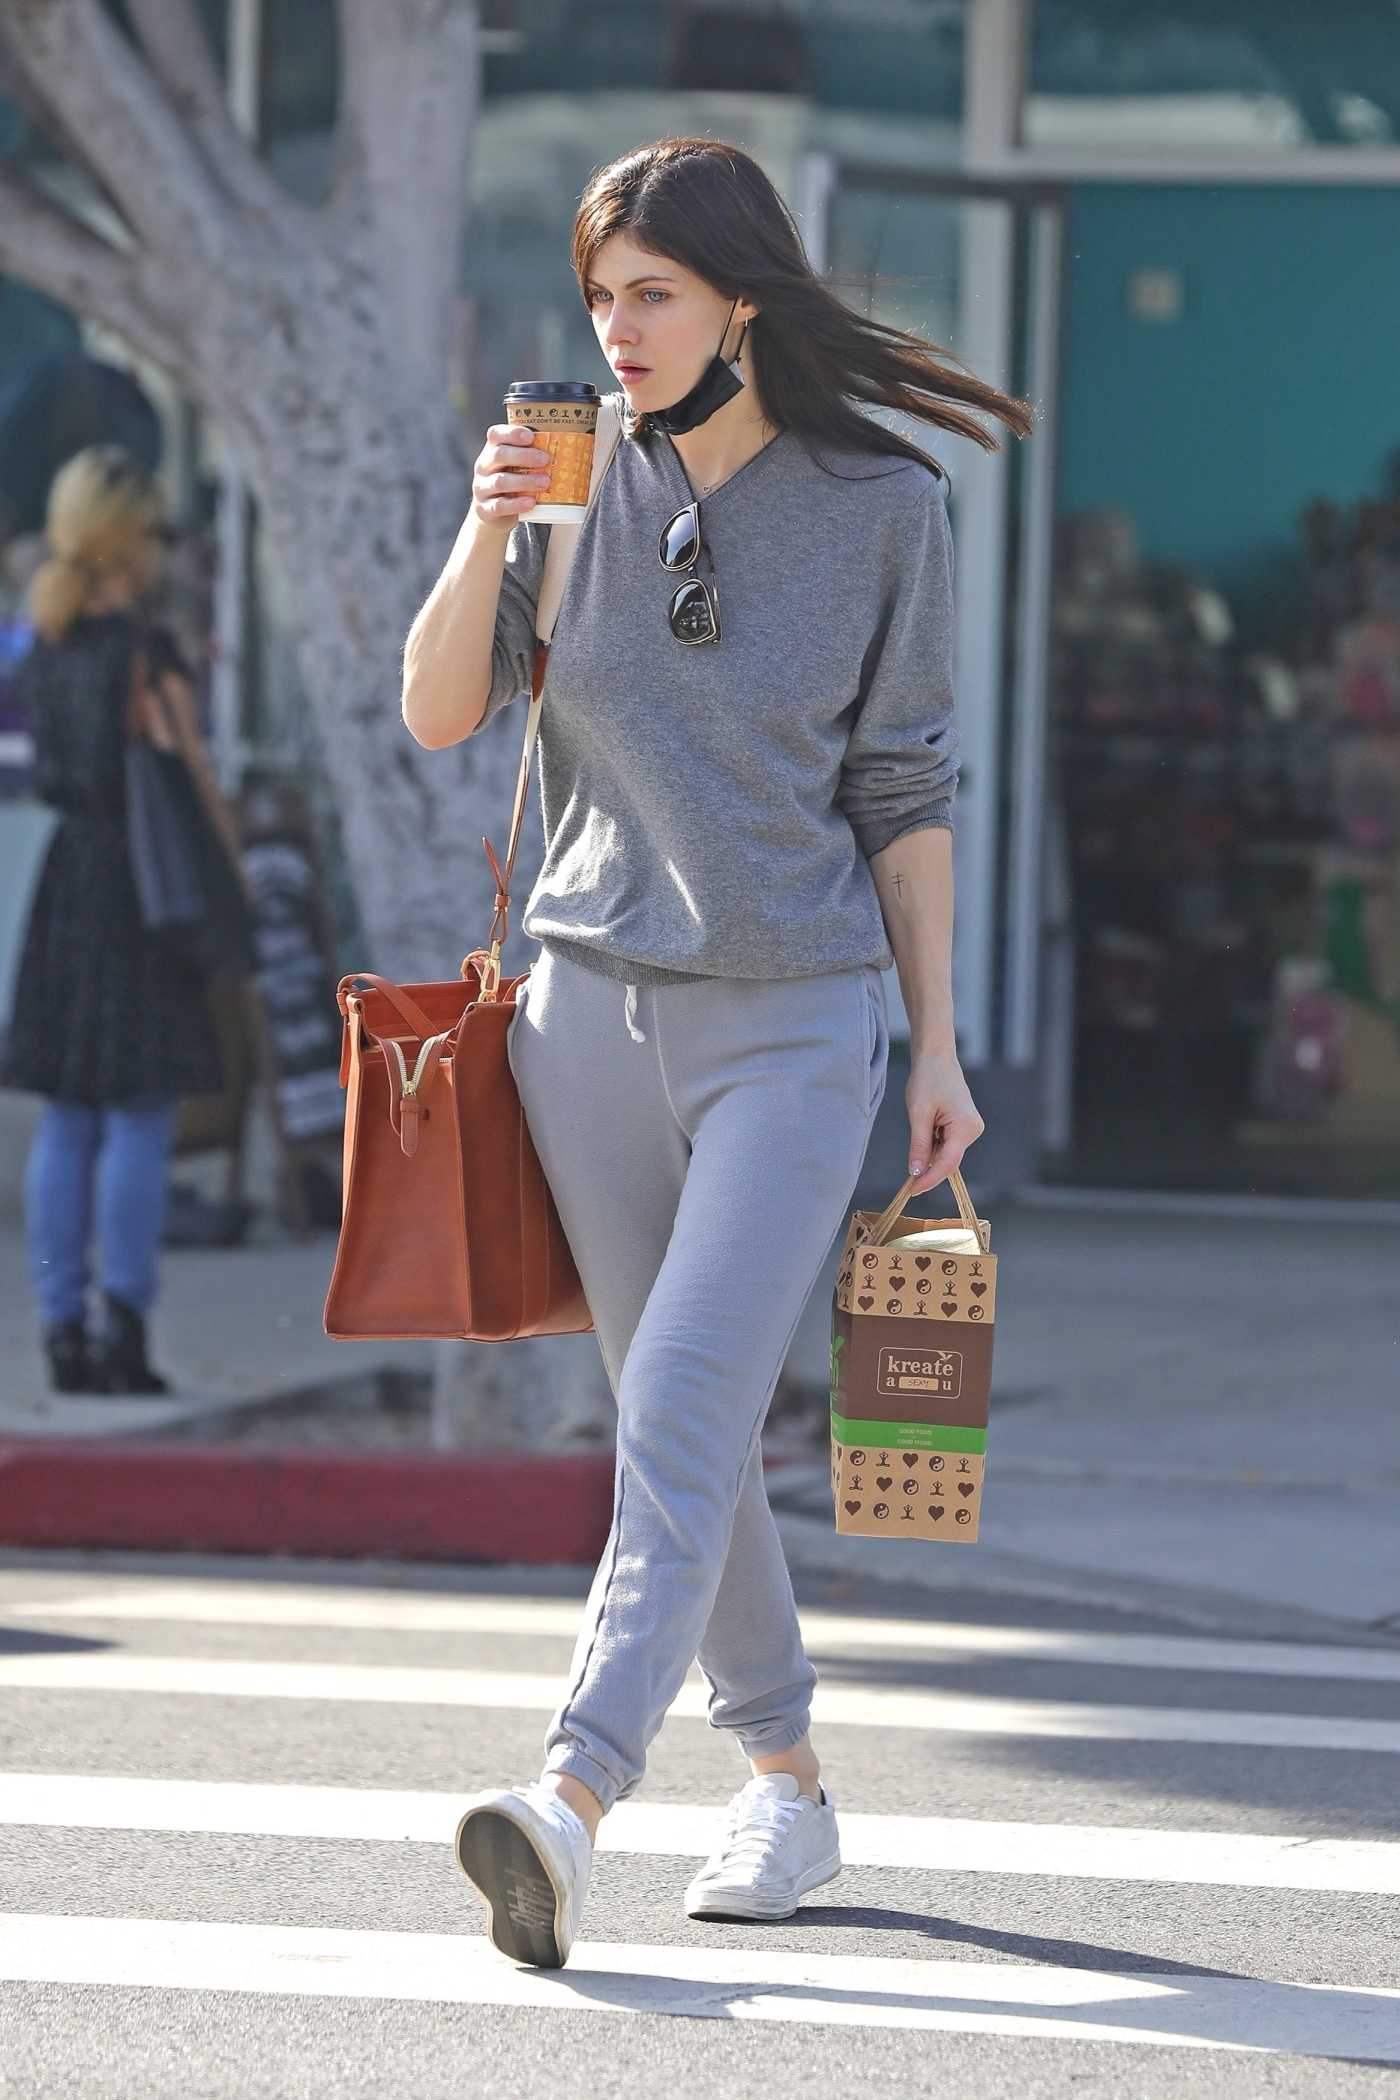 Alexandra Daddario in a Grey Sweatpants Was Seen Out in Los Angeles 01/14/2022